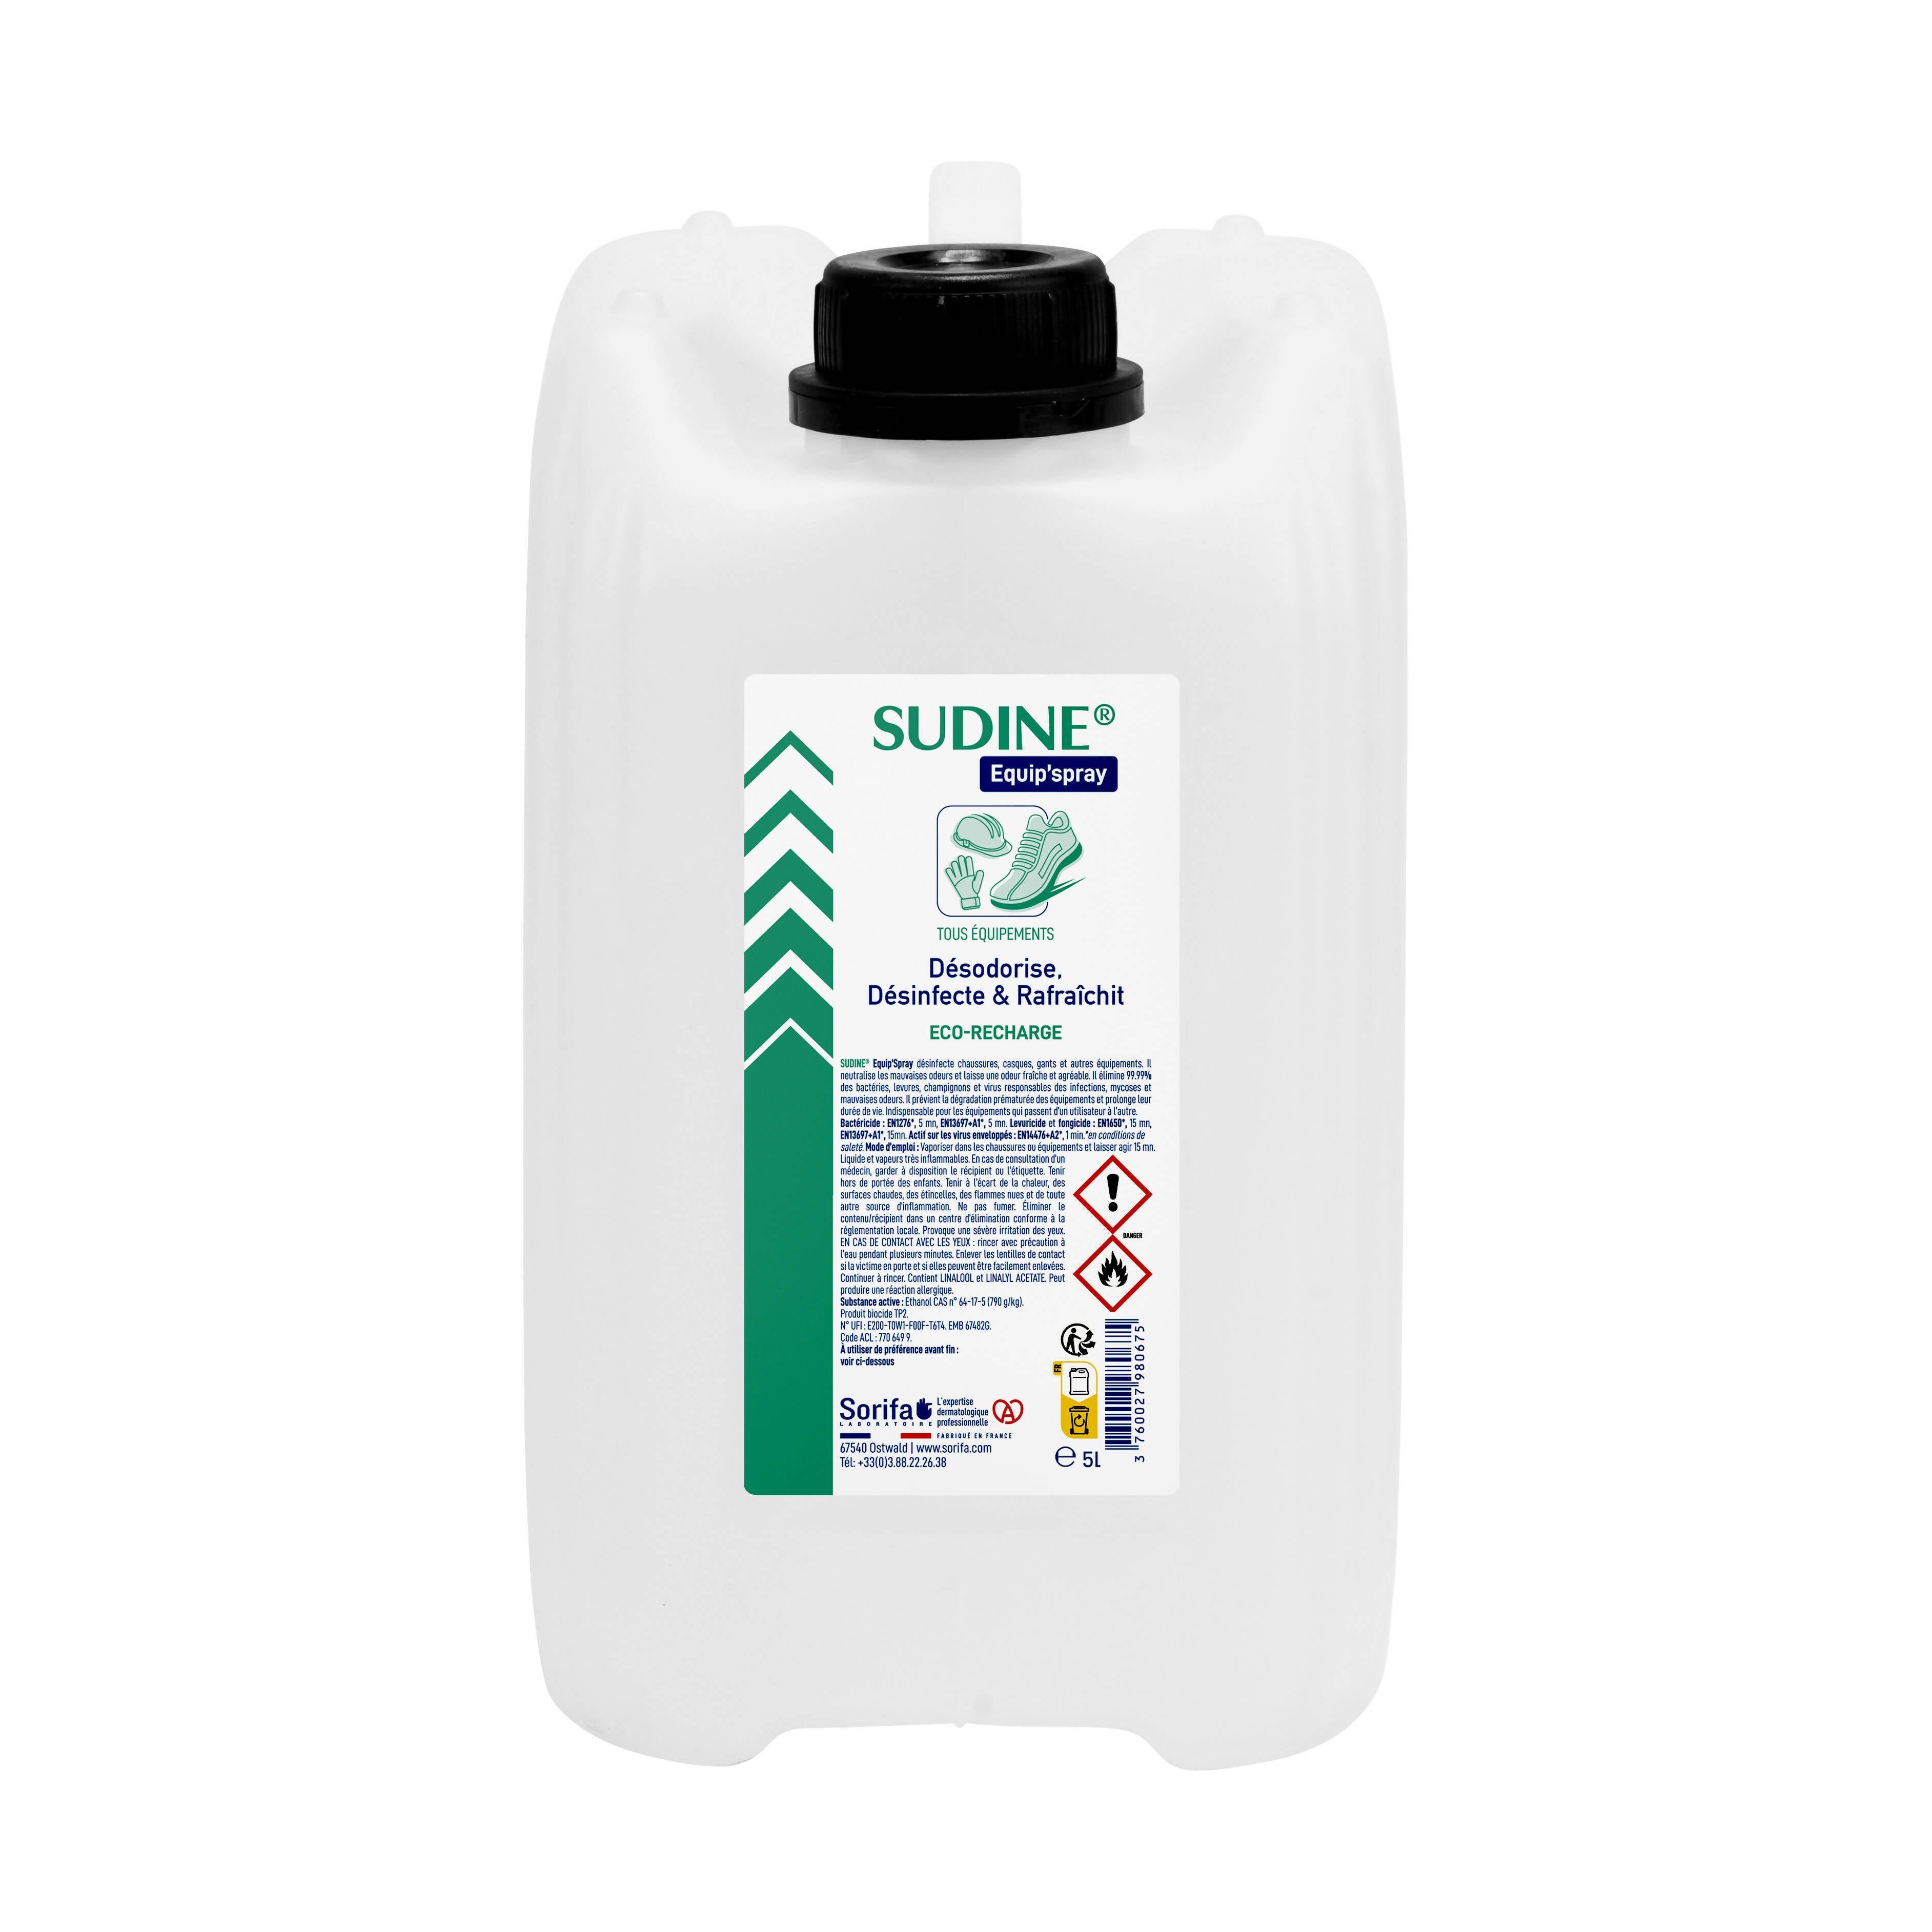 SORIFA - Set of 2 - Sudine Equip'spray - Deodorizes, disinfects, refreshes - Shoes, helmets, gloves, equipment - 5L refill for SUDINE Equip'spray 50 and 125 ml or for the 1L SORIFA Spray